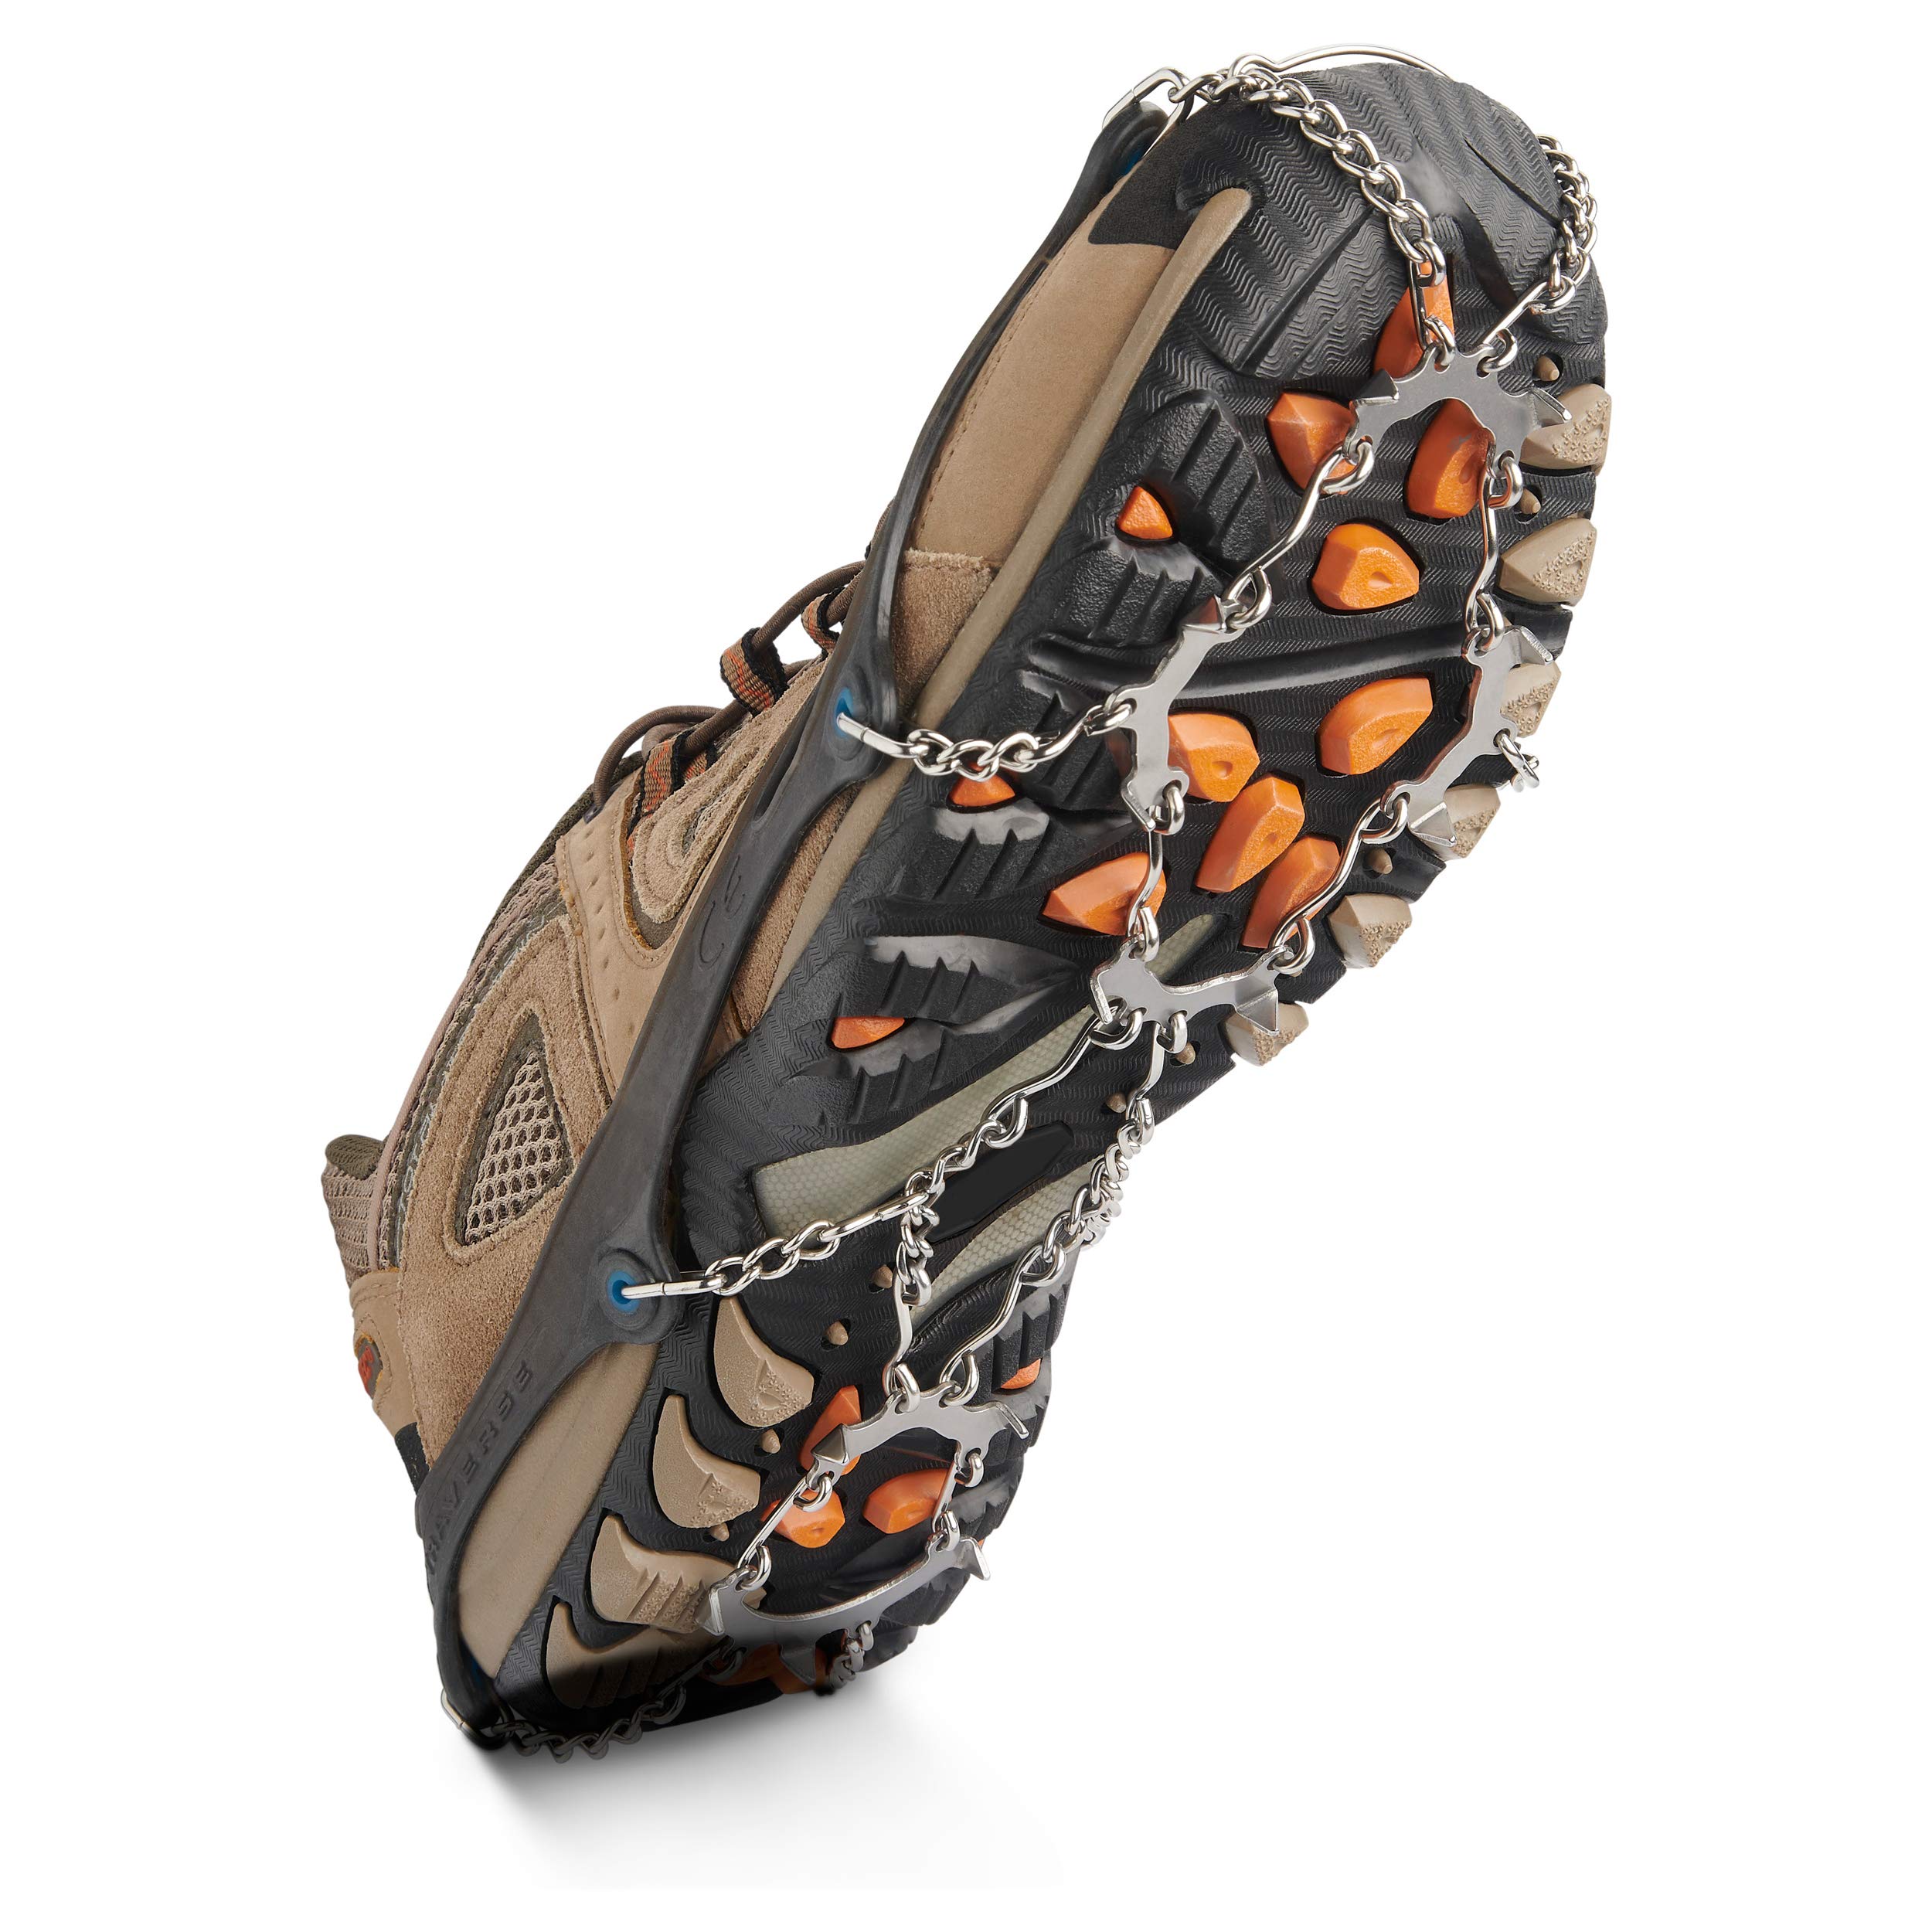 Yaktrax Traverse Heavy-Duty Traction Spikes for Walking on Snow and Ice (1 Pair)